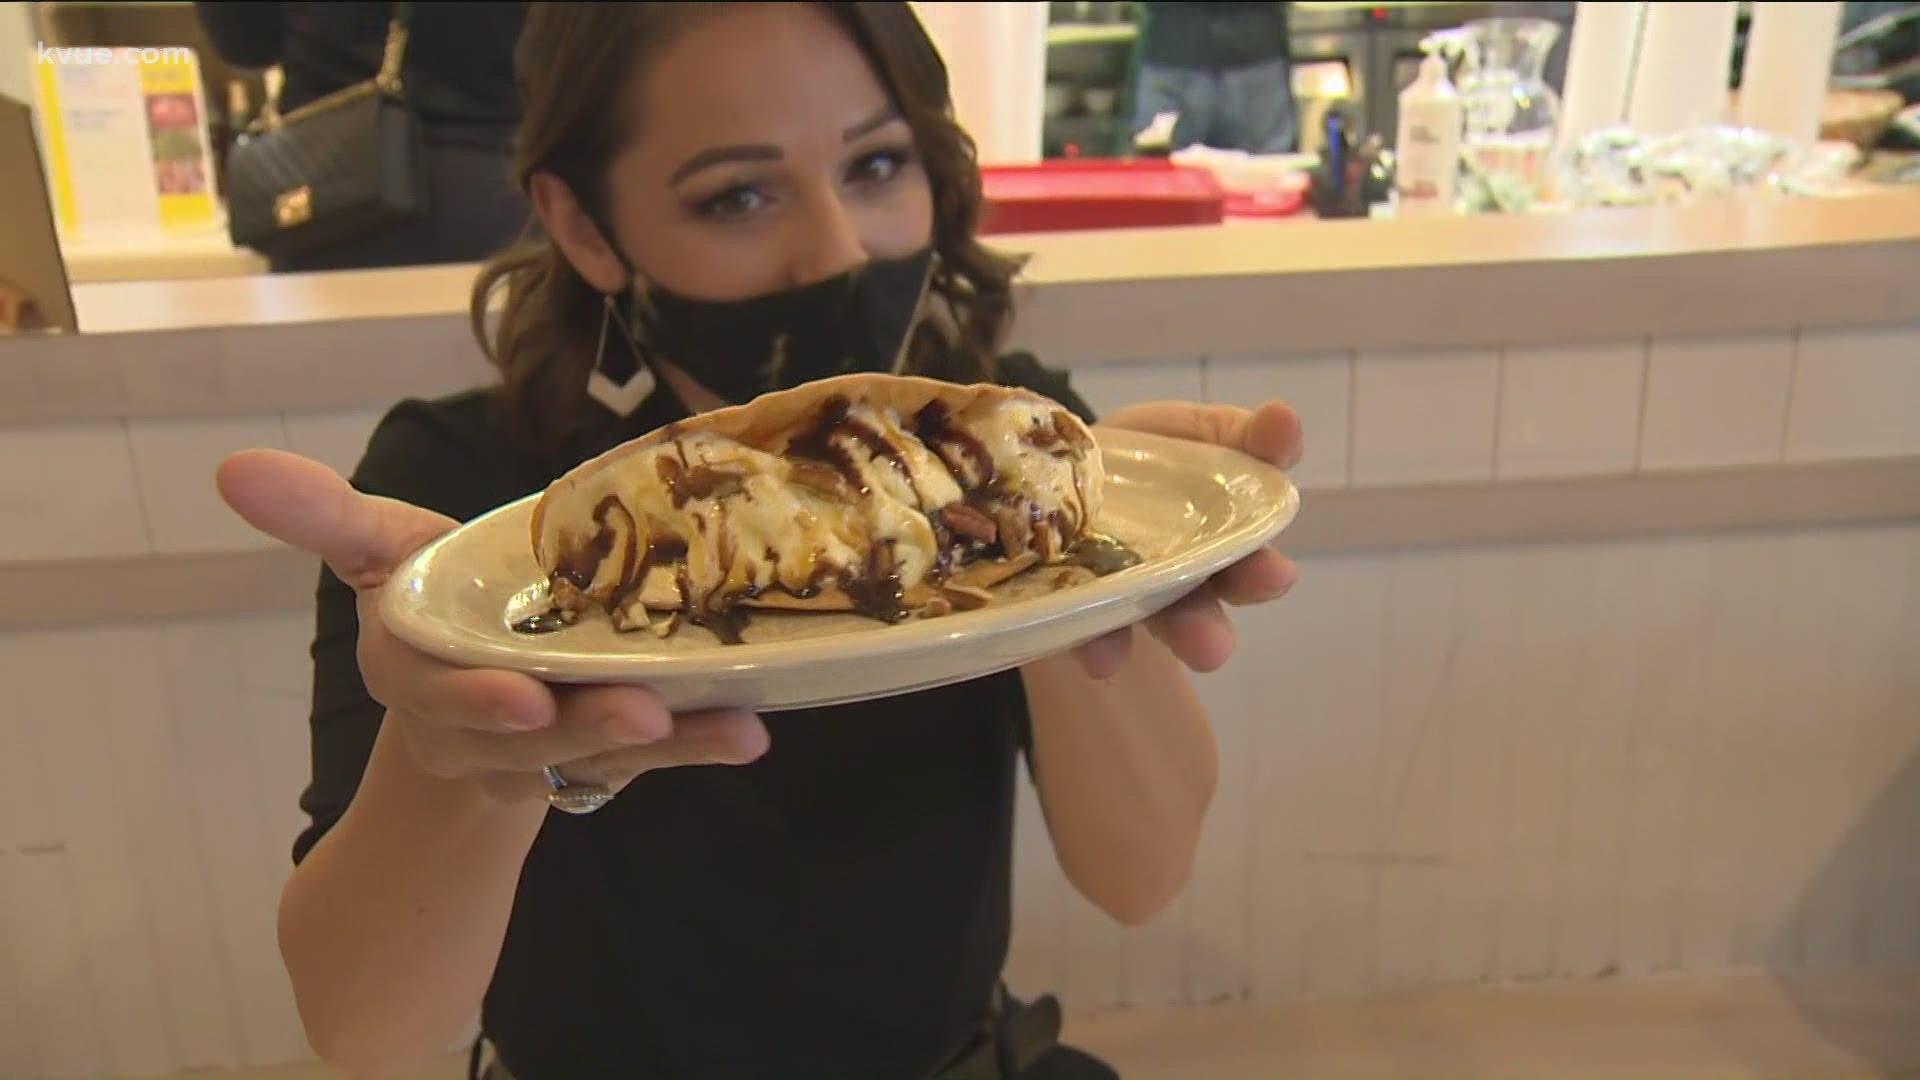 KVUE is spotlighting local businesses that need a little help during the ongoing pandemic. KVUE's Brittany Flowers stopped by ZuZu's Handmade Mexican Food.